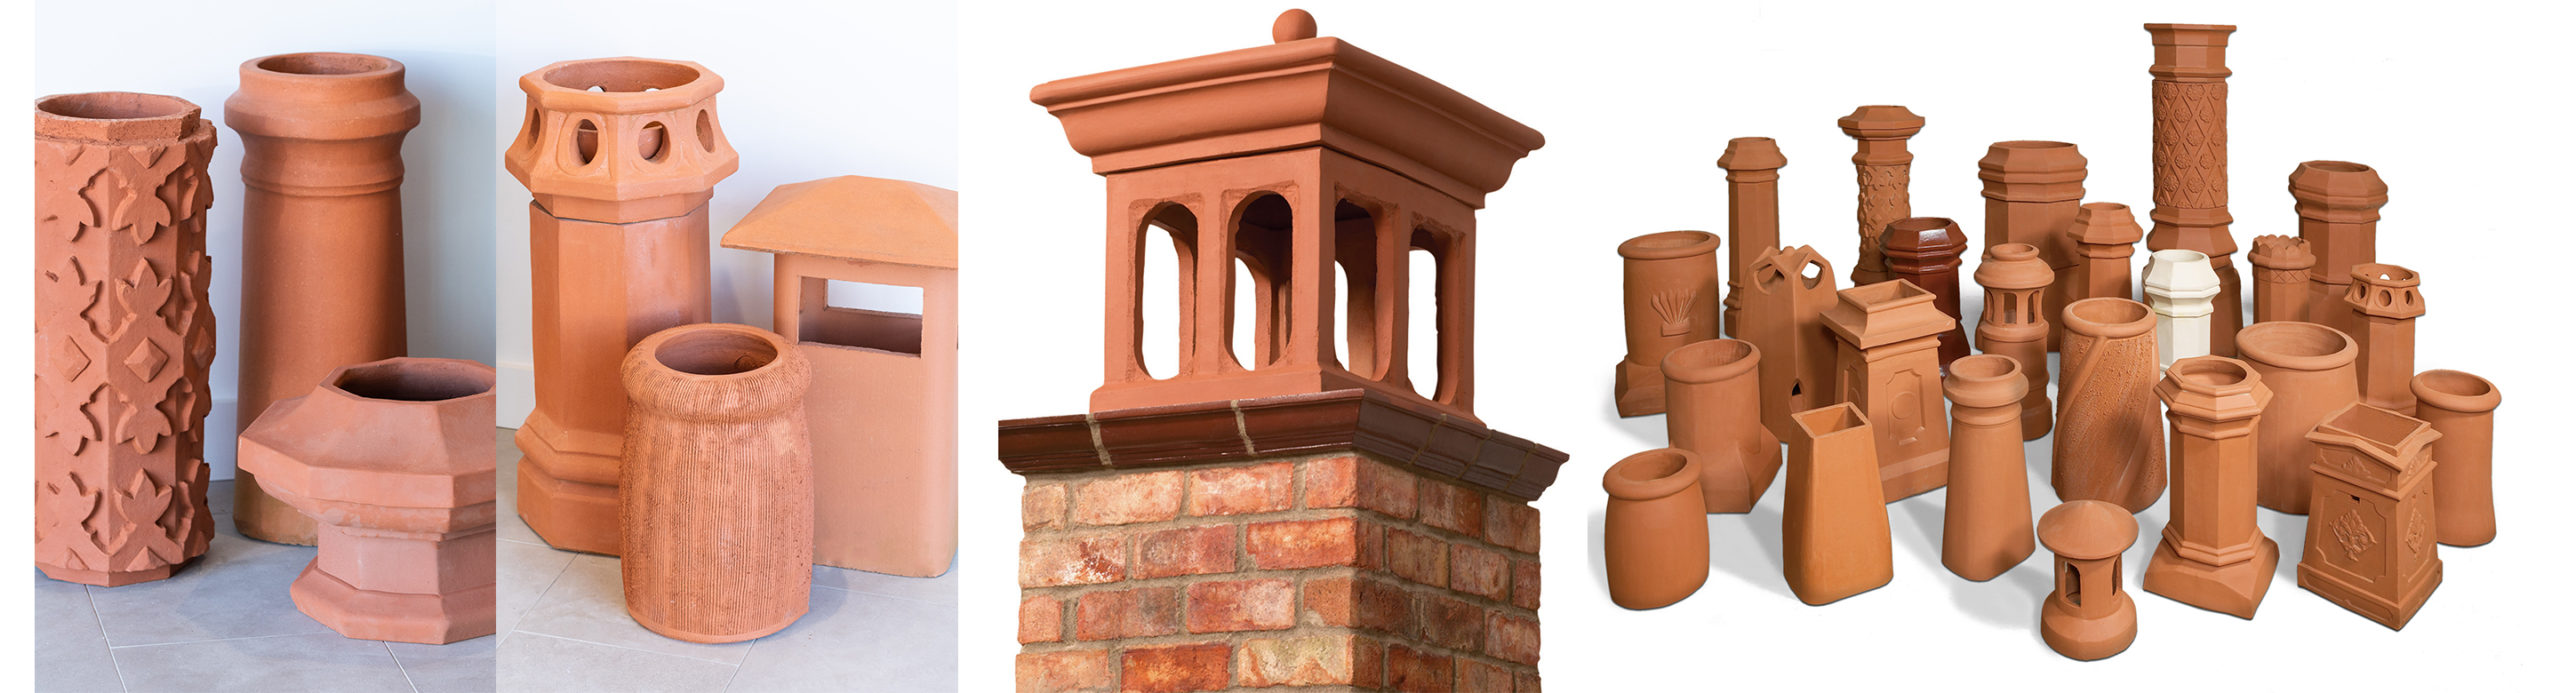 Chimney Pots & Wall Copings